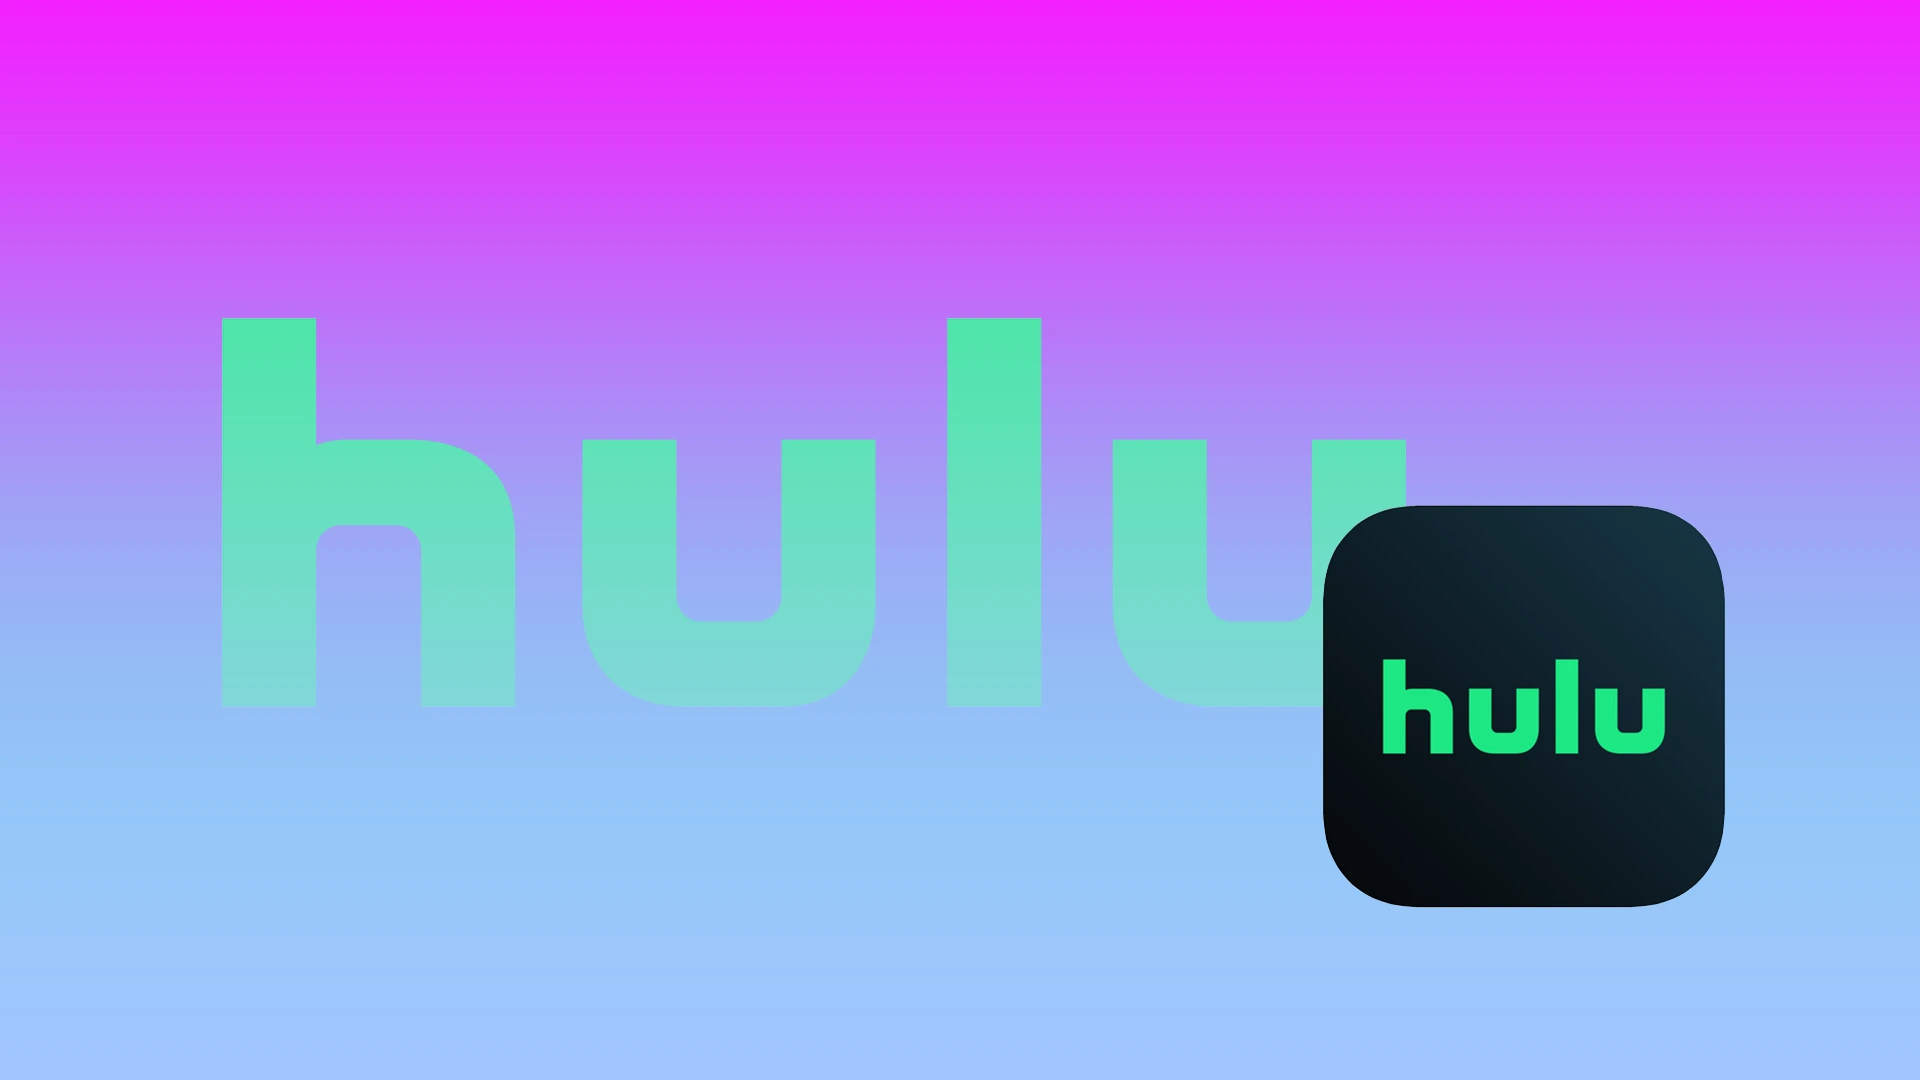 How to disconnect a device from Hulu using the Hulu app